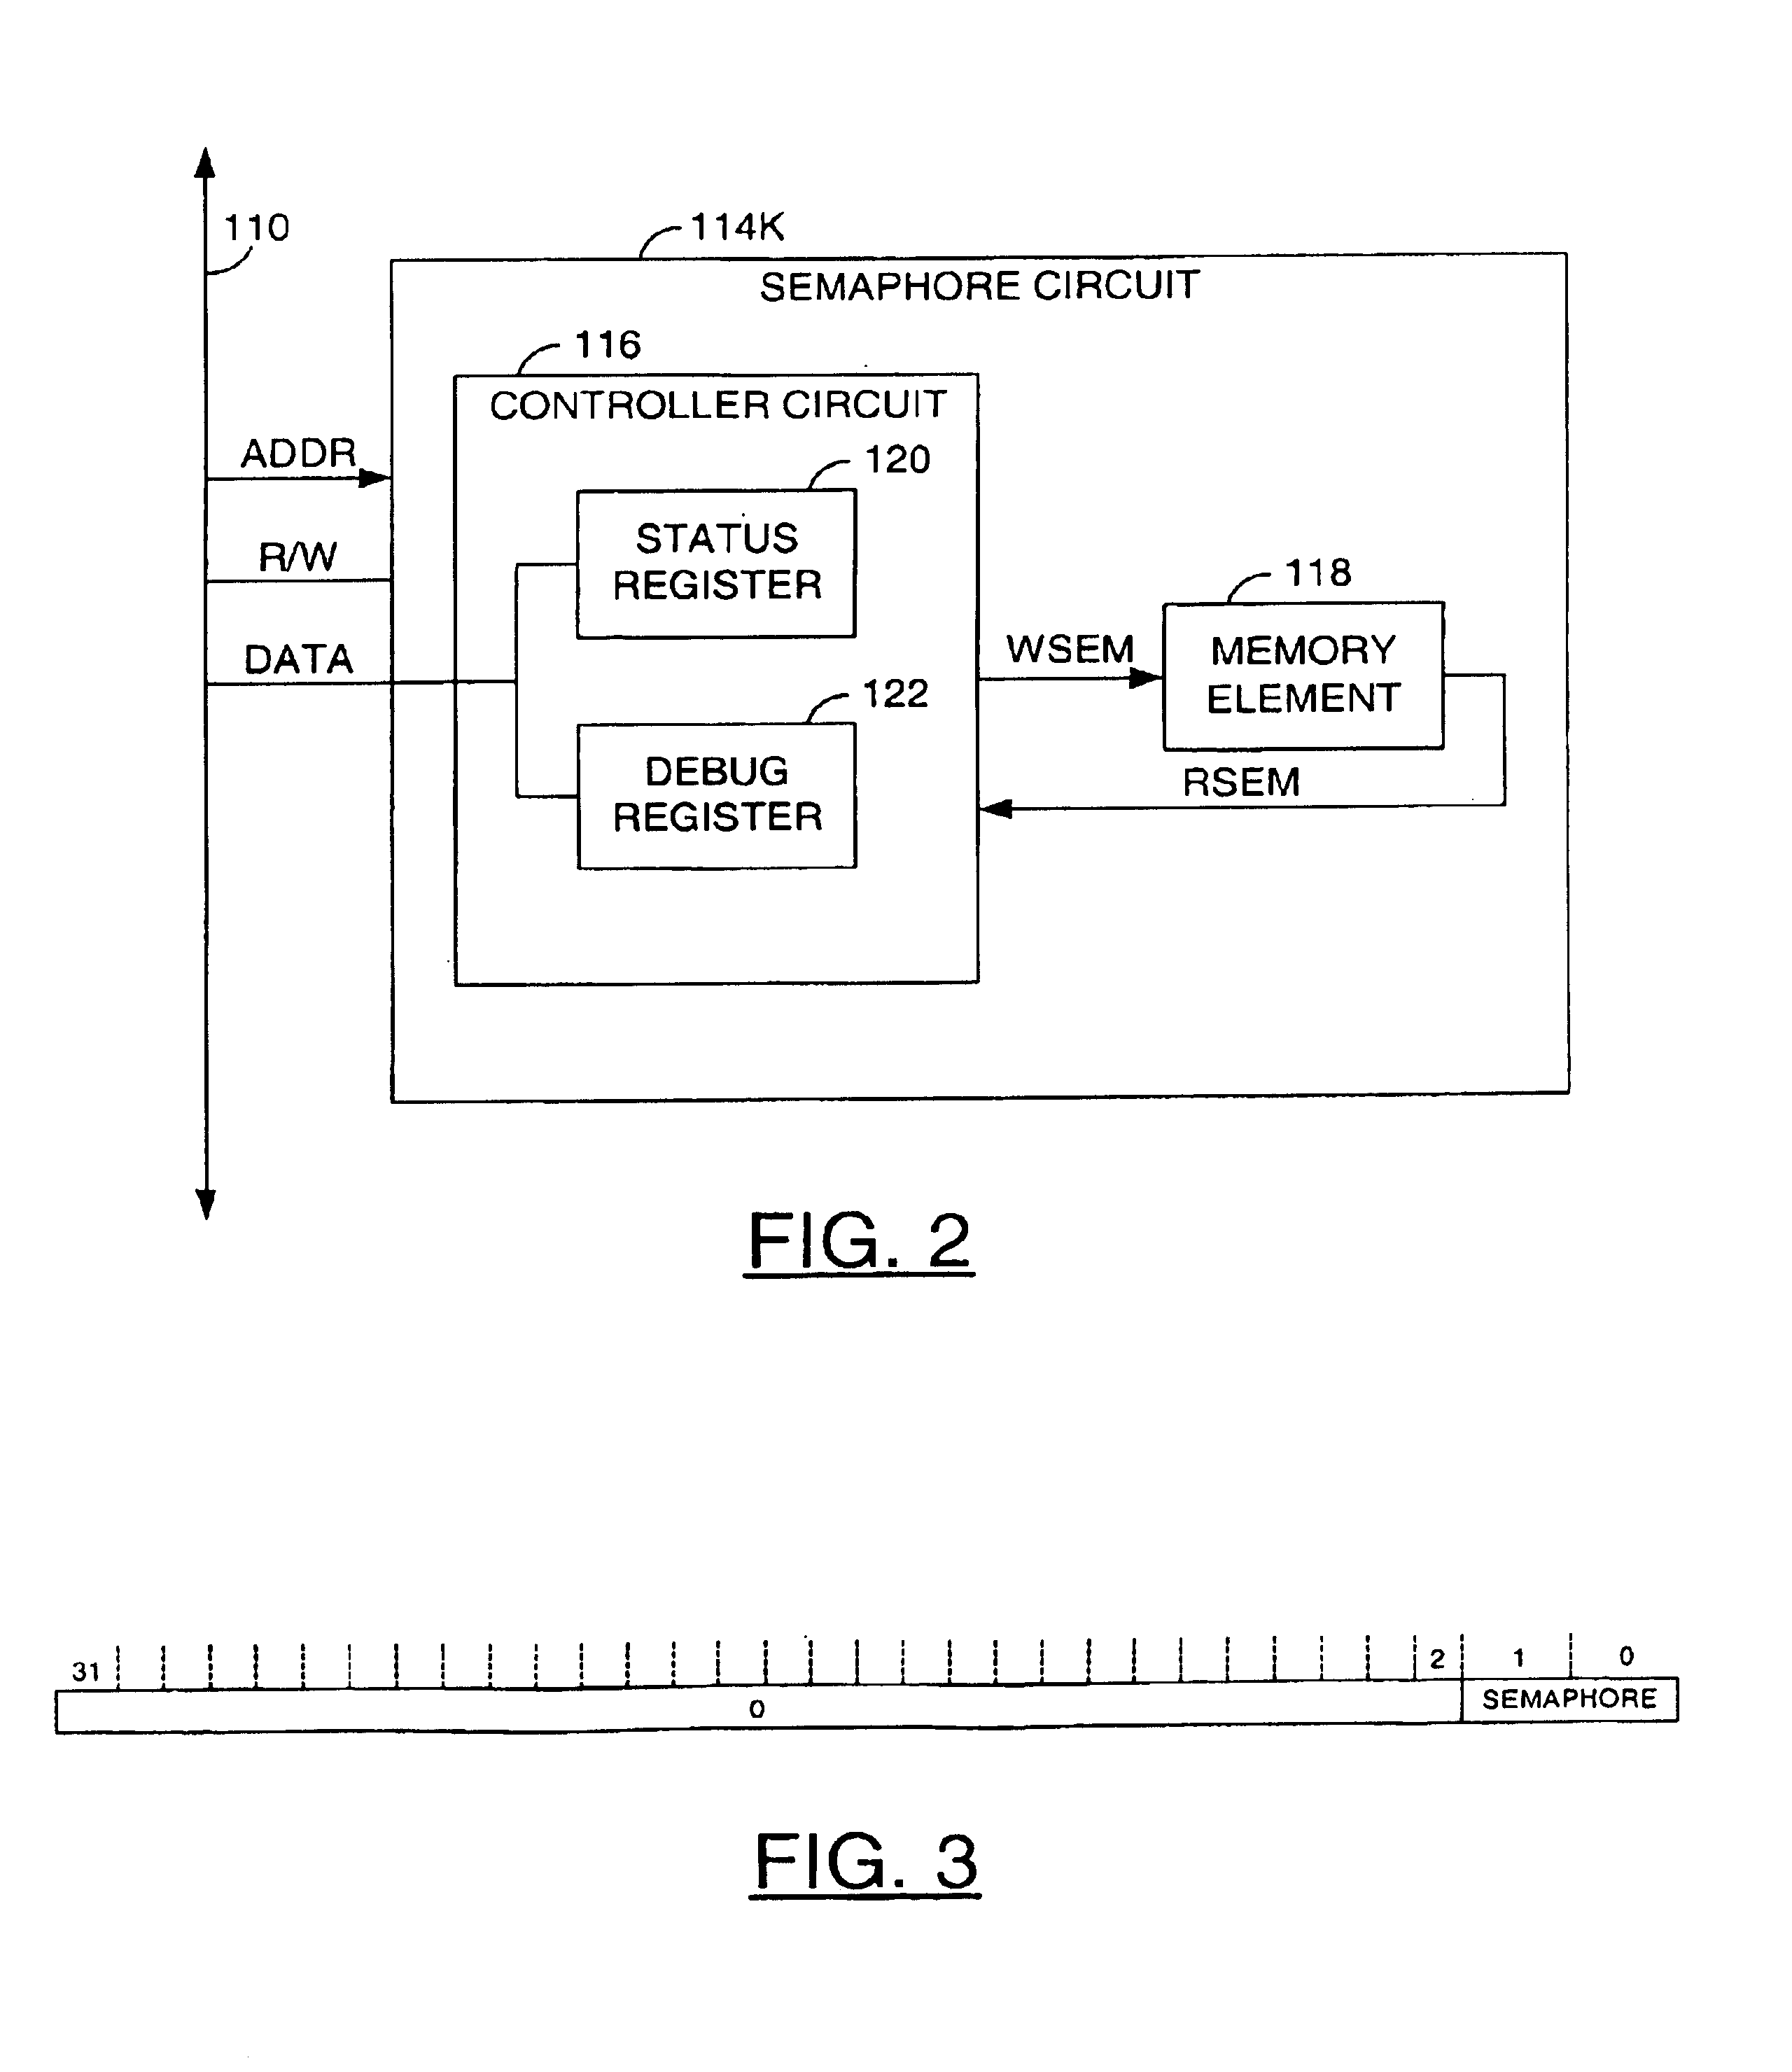 Hardware semaphores for a multi-processor system within a shared memory architecture